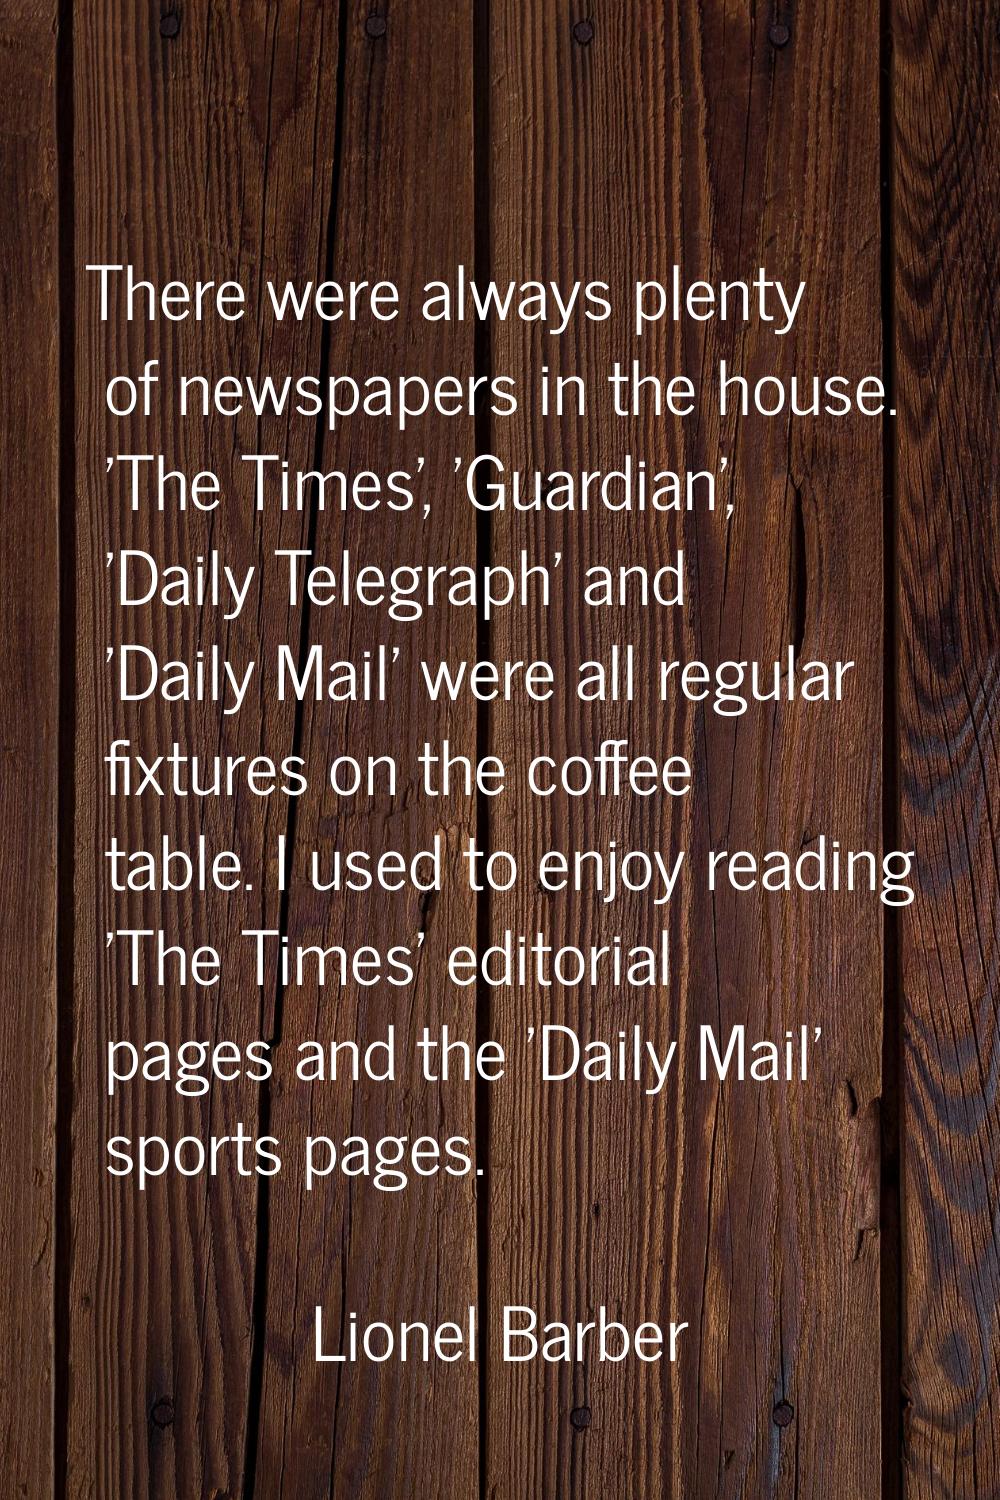 There were always plenty of newspapers in the house. 'The Times', 'Guardian', 'Daily Telegraph' and